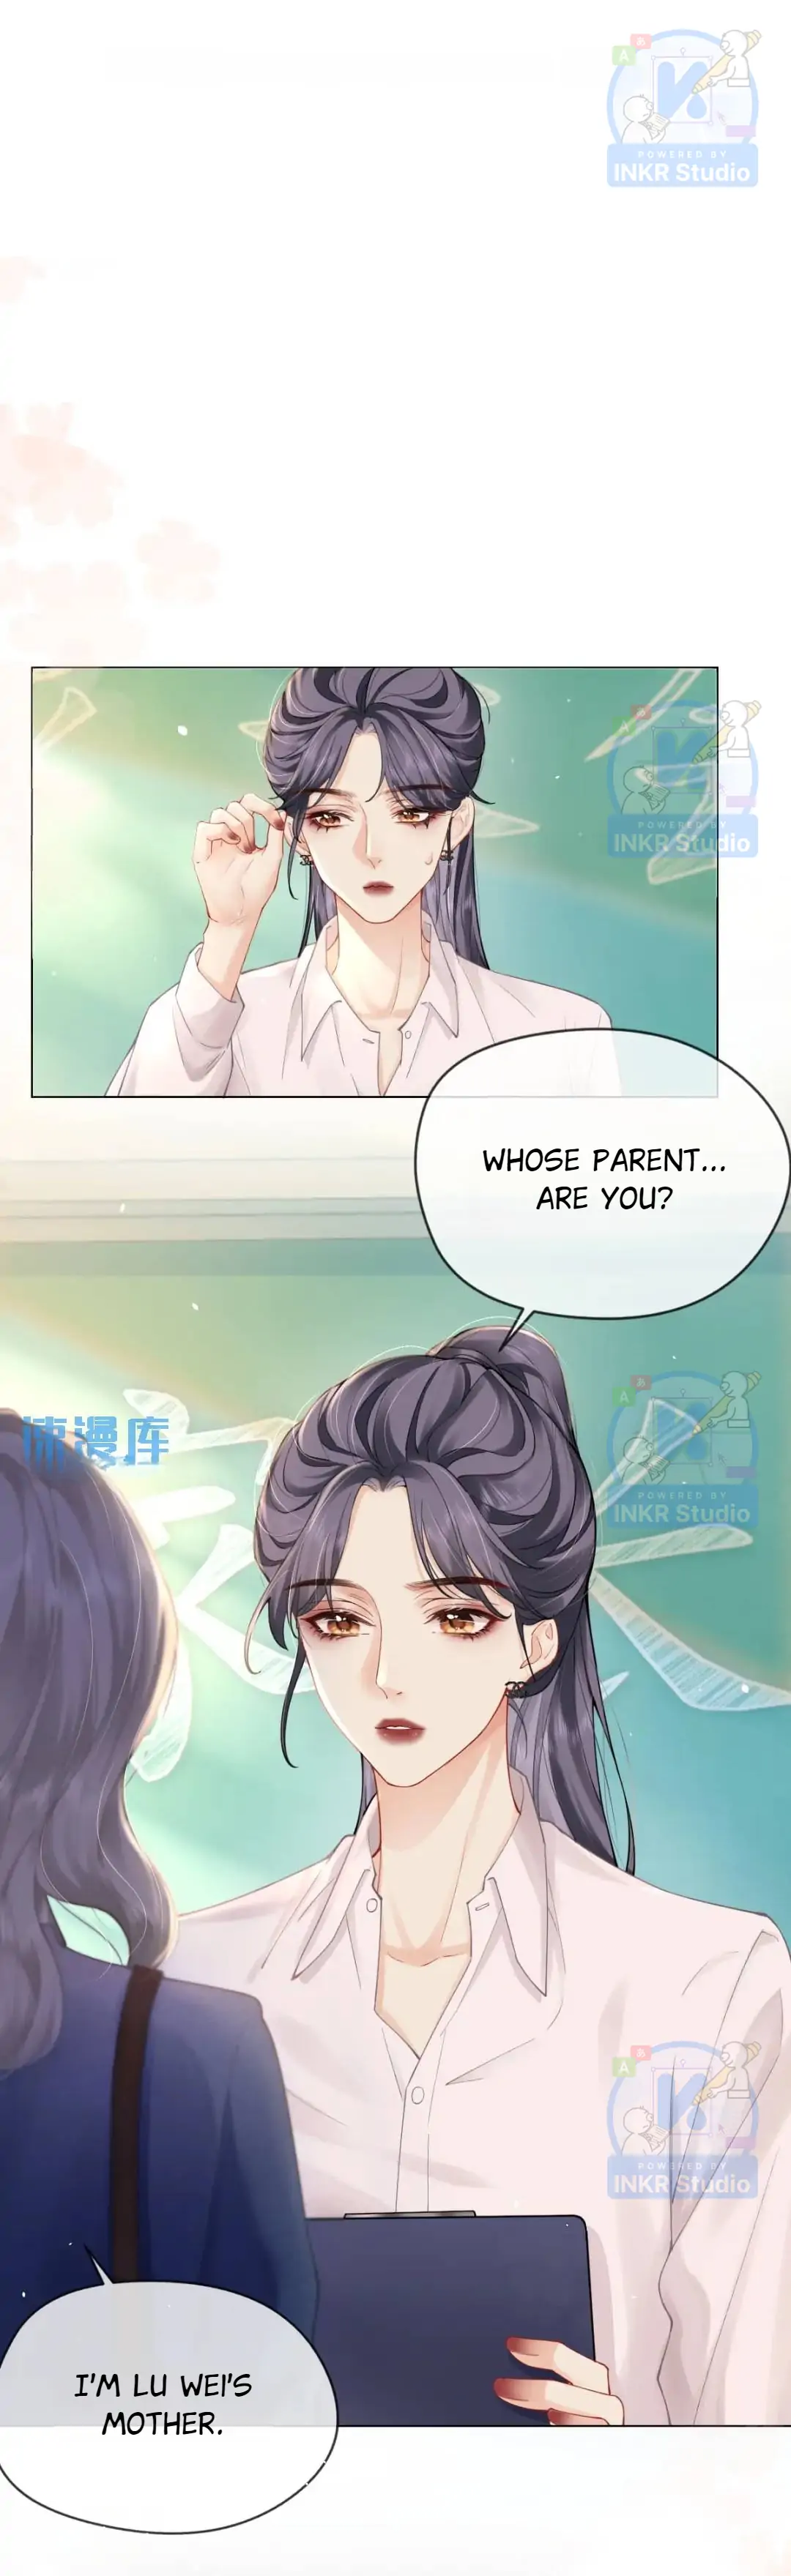 Teachers Who Always Call Parents - Page 2